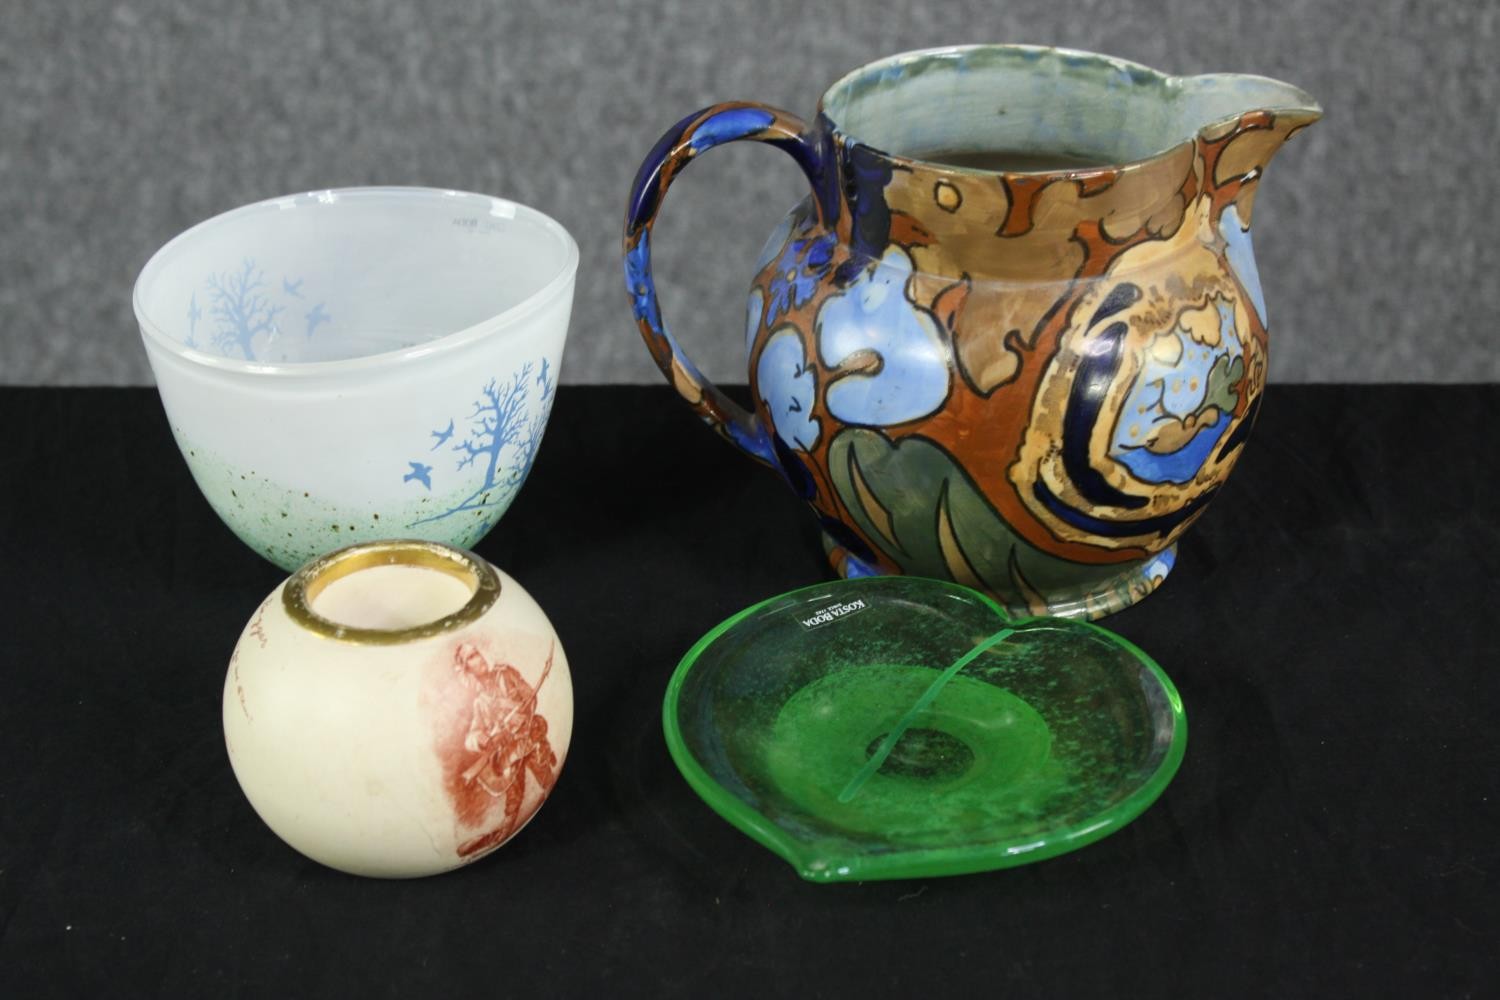 A collection of glass and ceramics, including a Kosta Boda art glass bowl with tree and bird design,